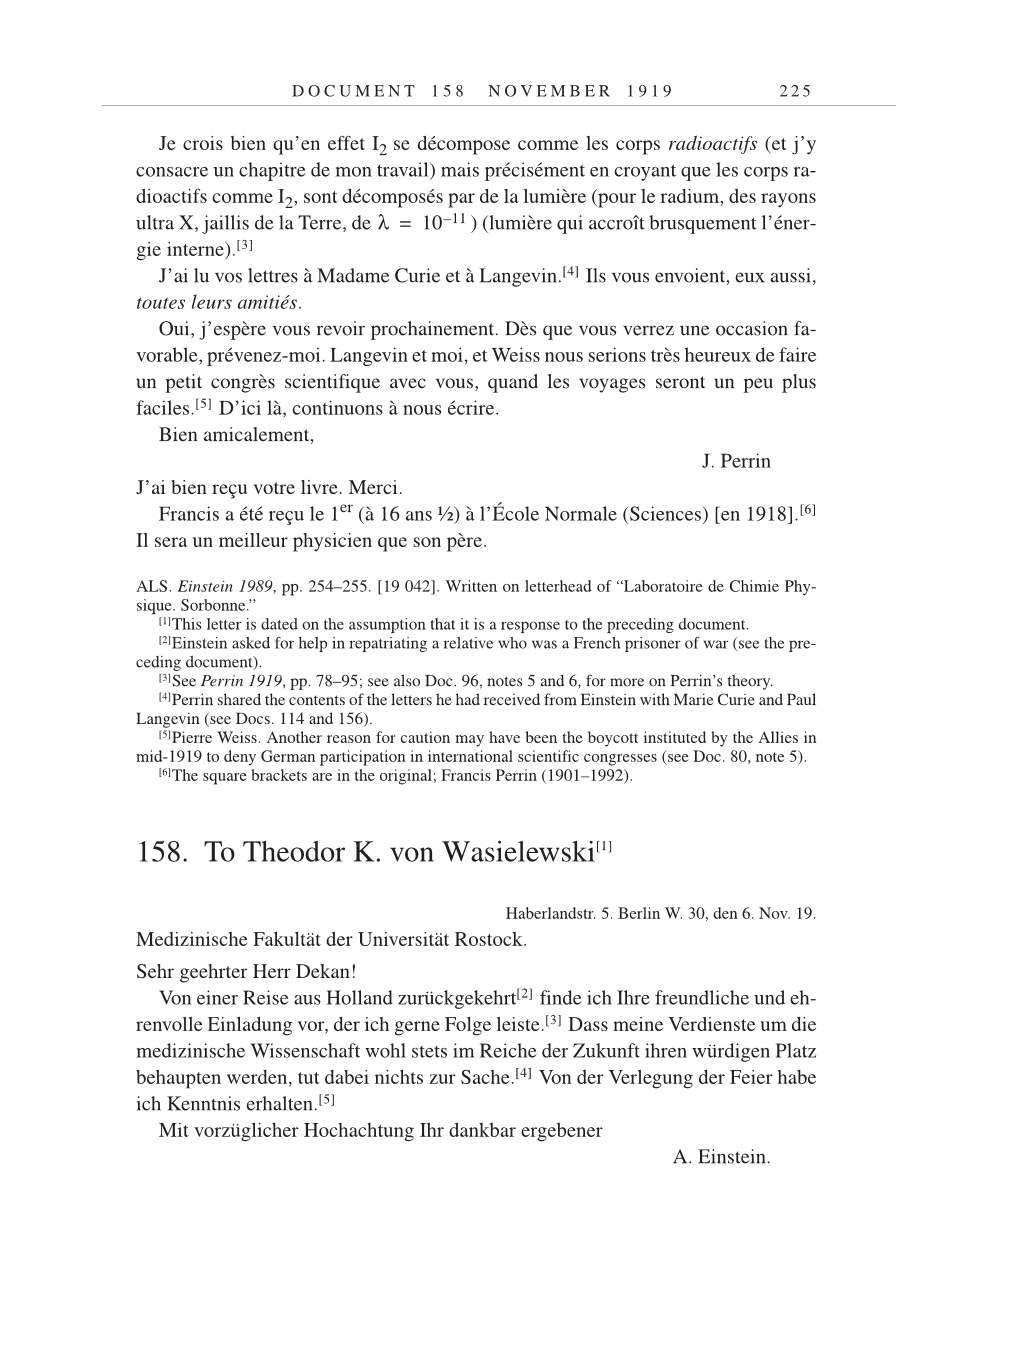 Volume 9: The Berlin Years: Correspondence January 1919-April 1920 page 225